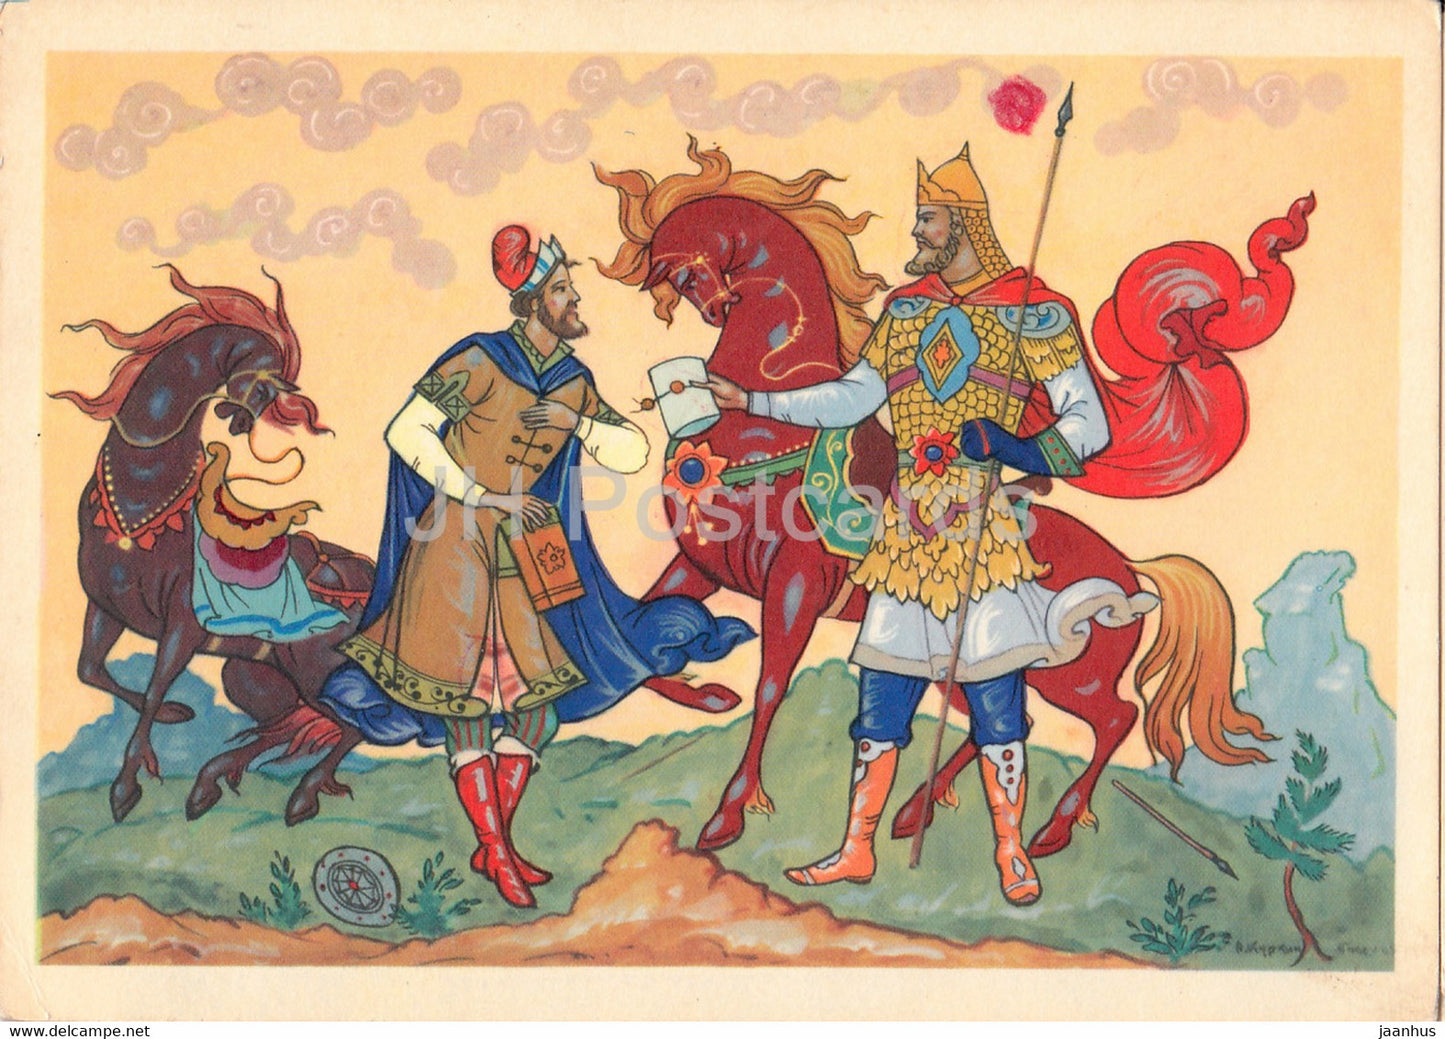 The Tale of Tsar Saltan by A. Pushkin - horse - messenger - Fairy Tale - 1966 - Russia USSR - unused - JH Postcards